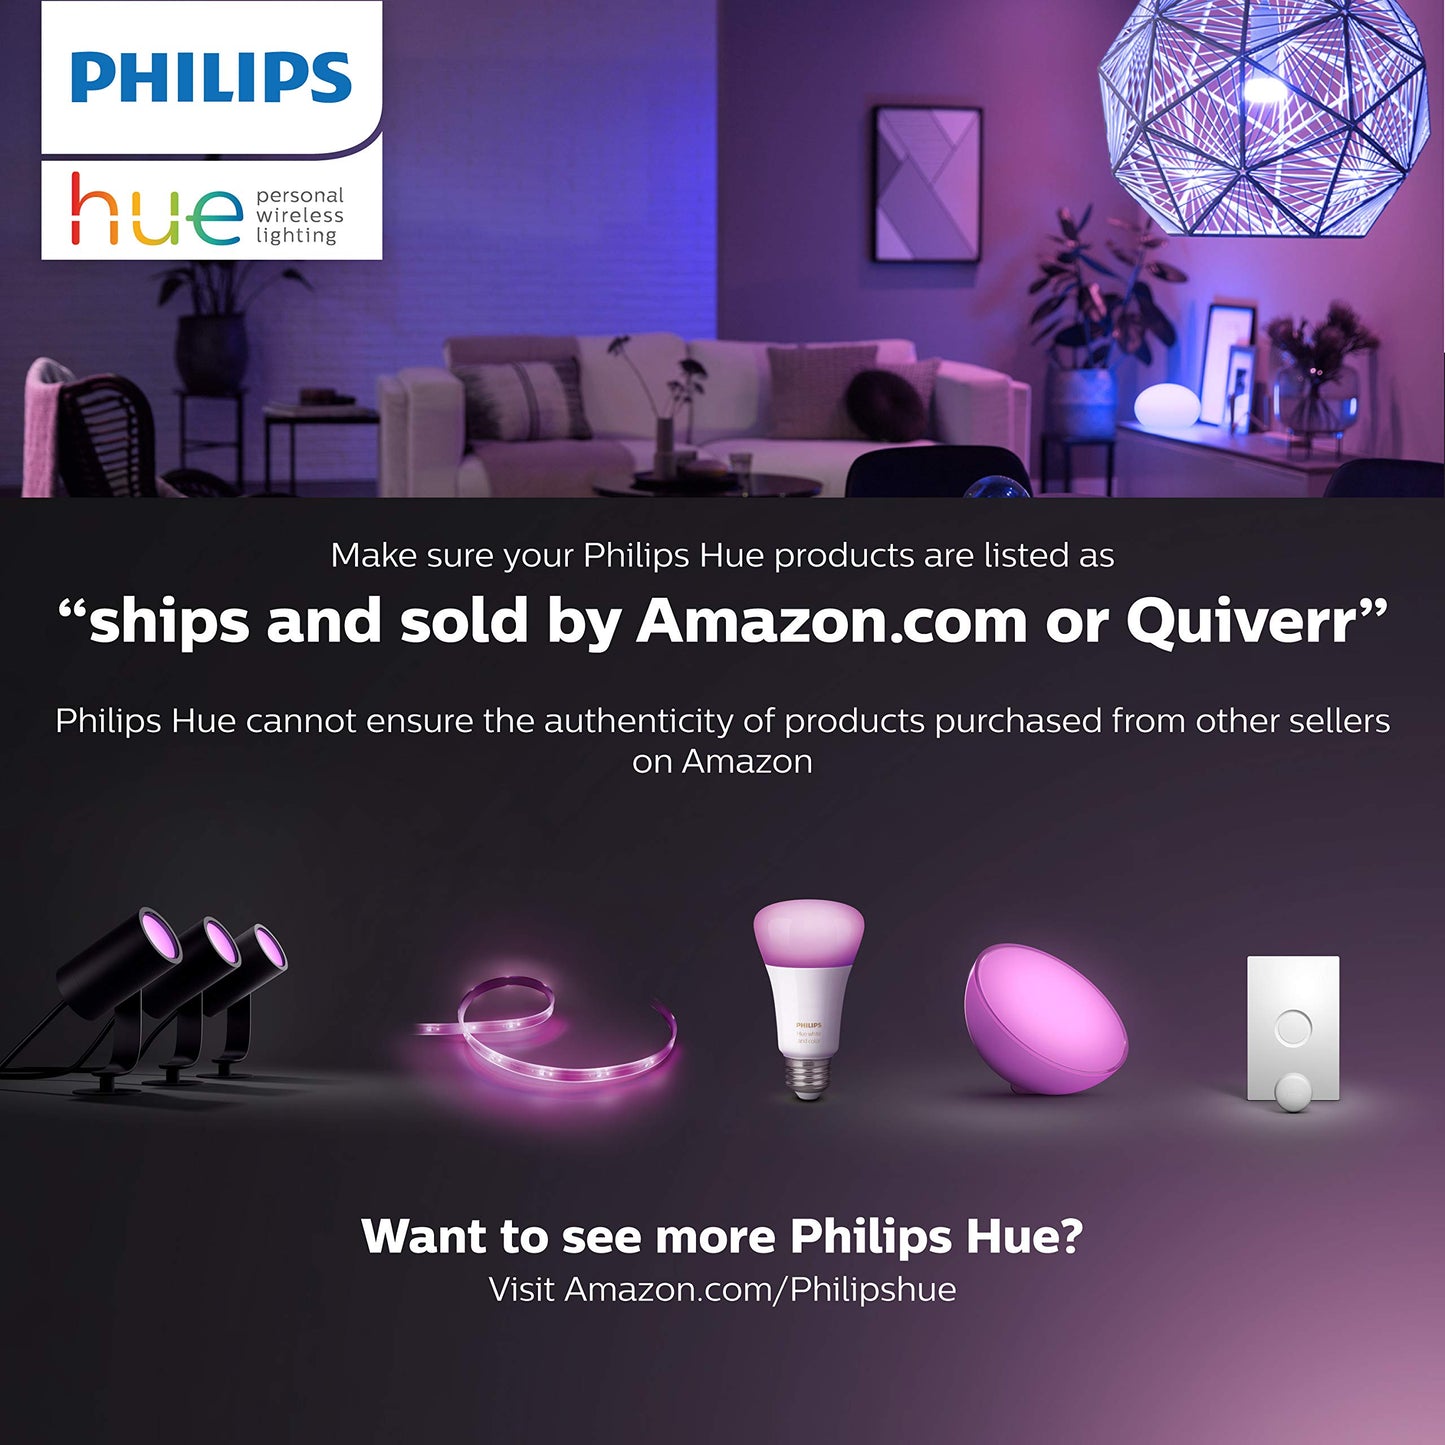 Philips Hue White Ambiance LED Smart Retrofit 4-inch Recessed Downlight, Bluetooth & Zigbee compatible, Warm-to-cool white light (Hue Hub Optional)